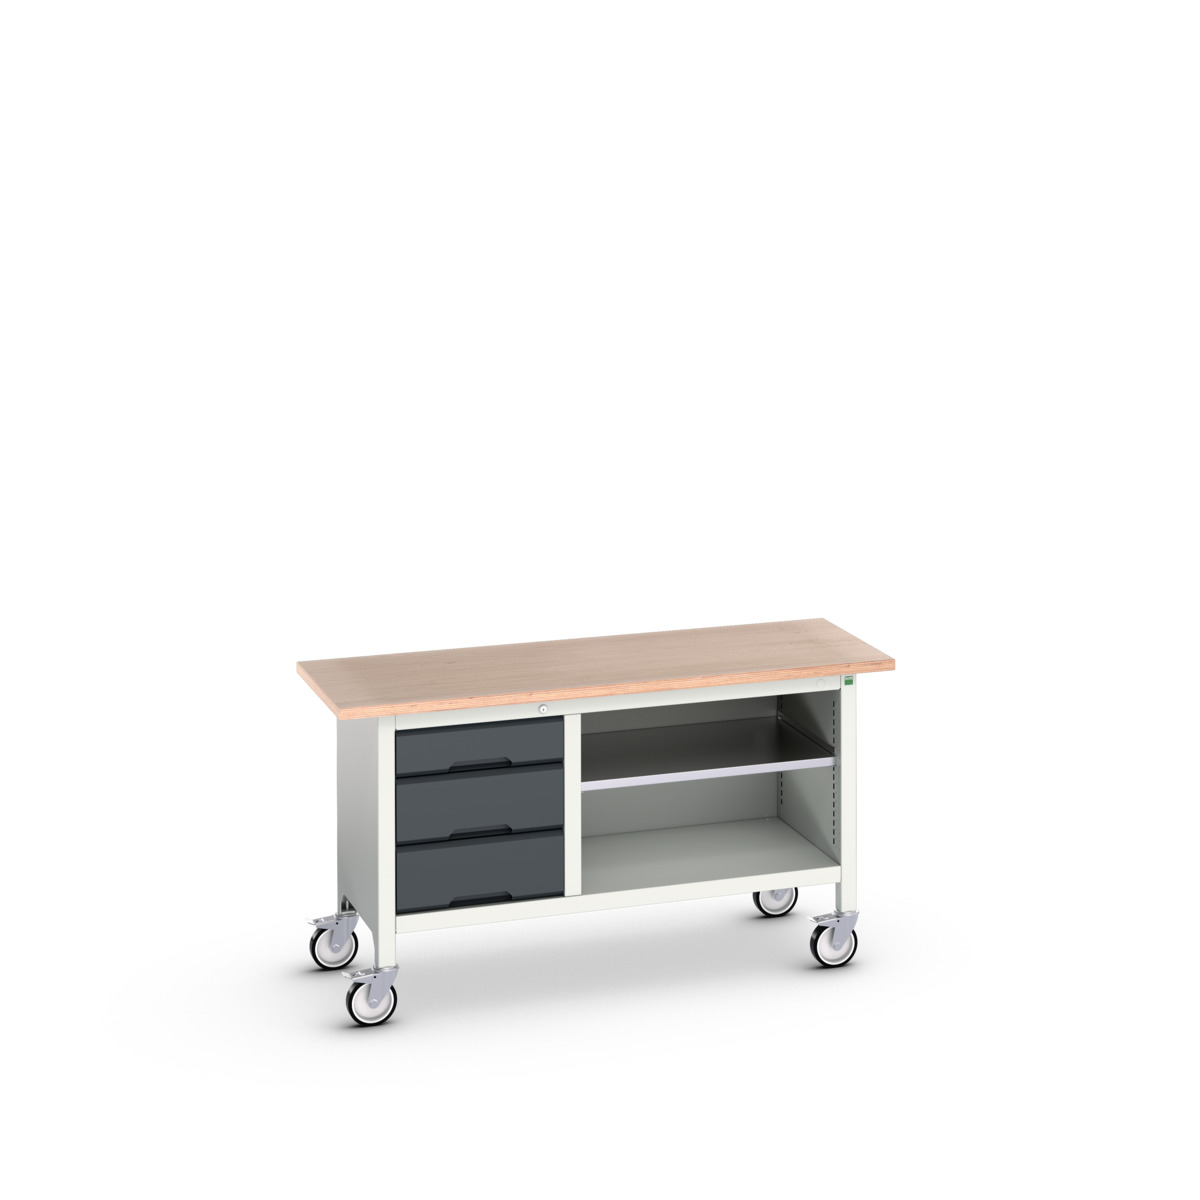 16923212.19 - verso mobile storage bench (mpx)